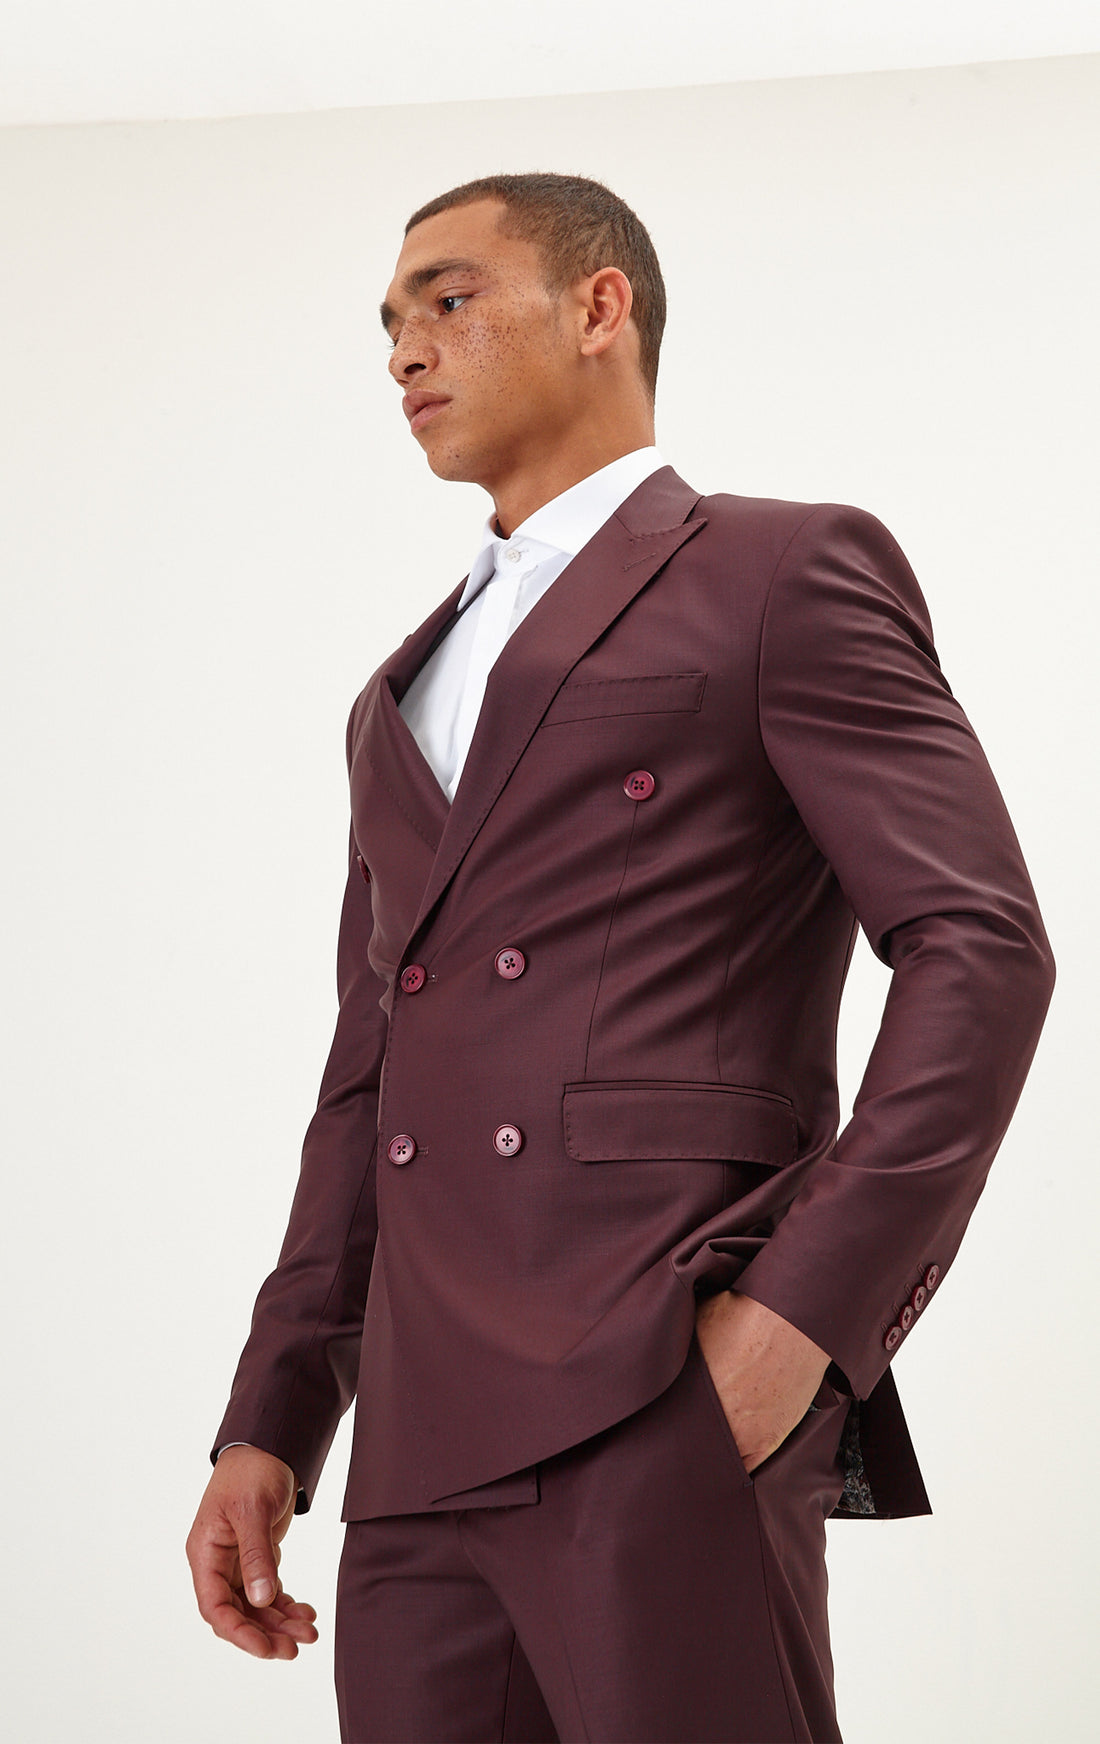 N° R206 Double Breasted Merino Wool Suit - Burgundy - Ron Tomson